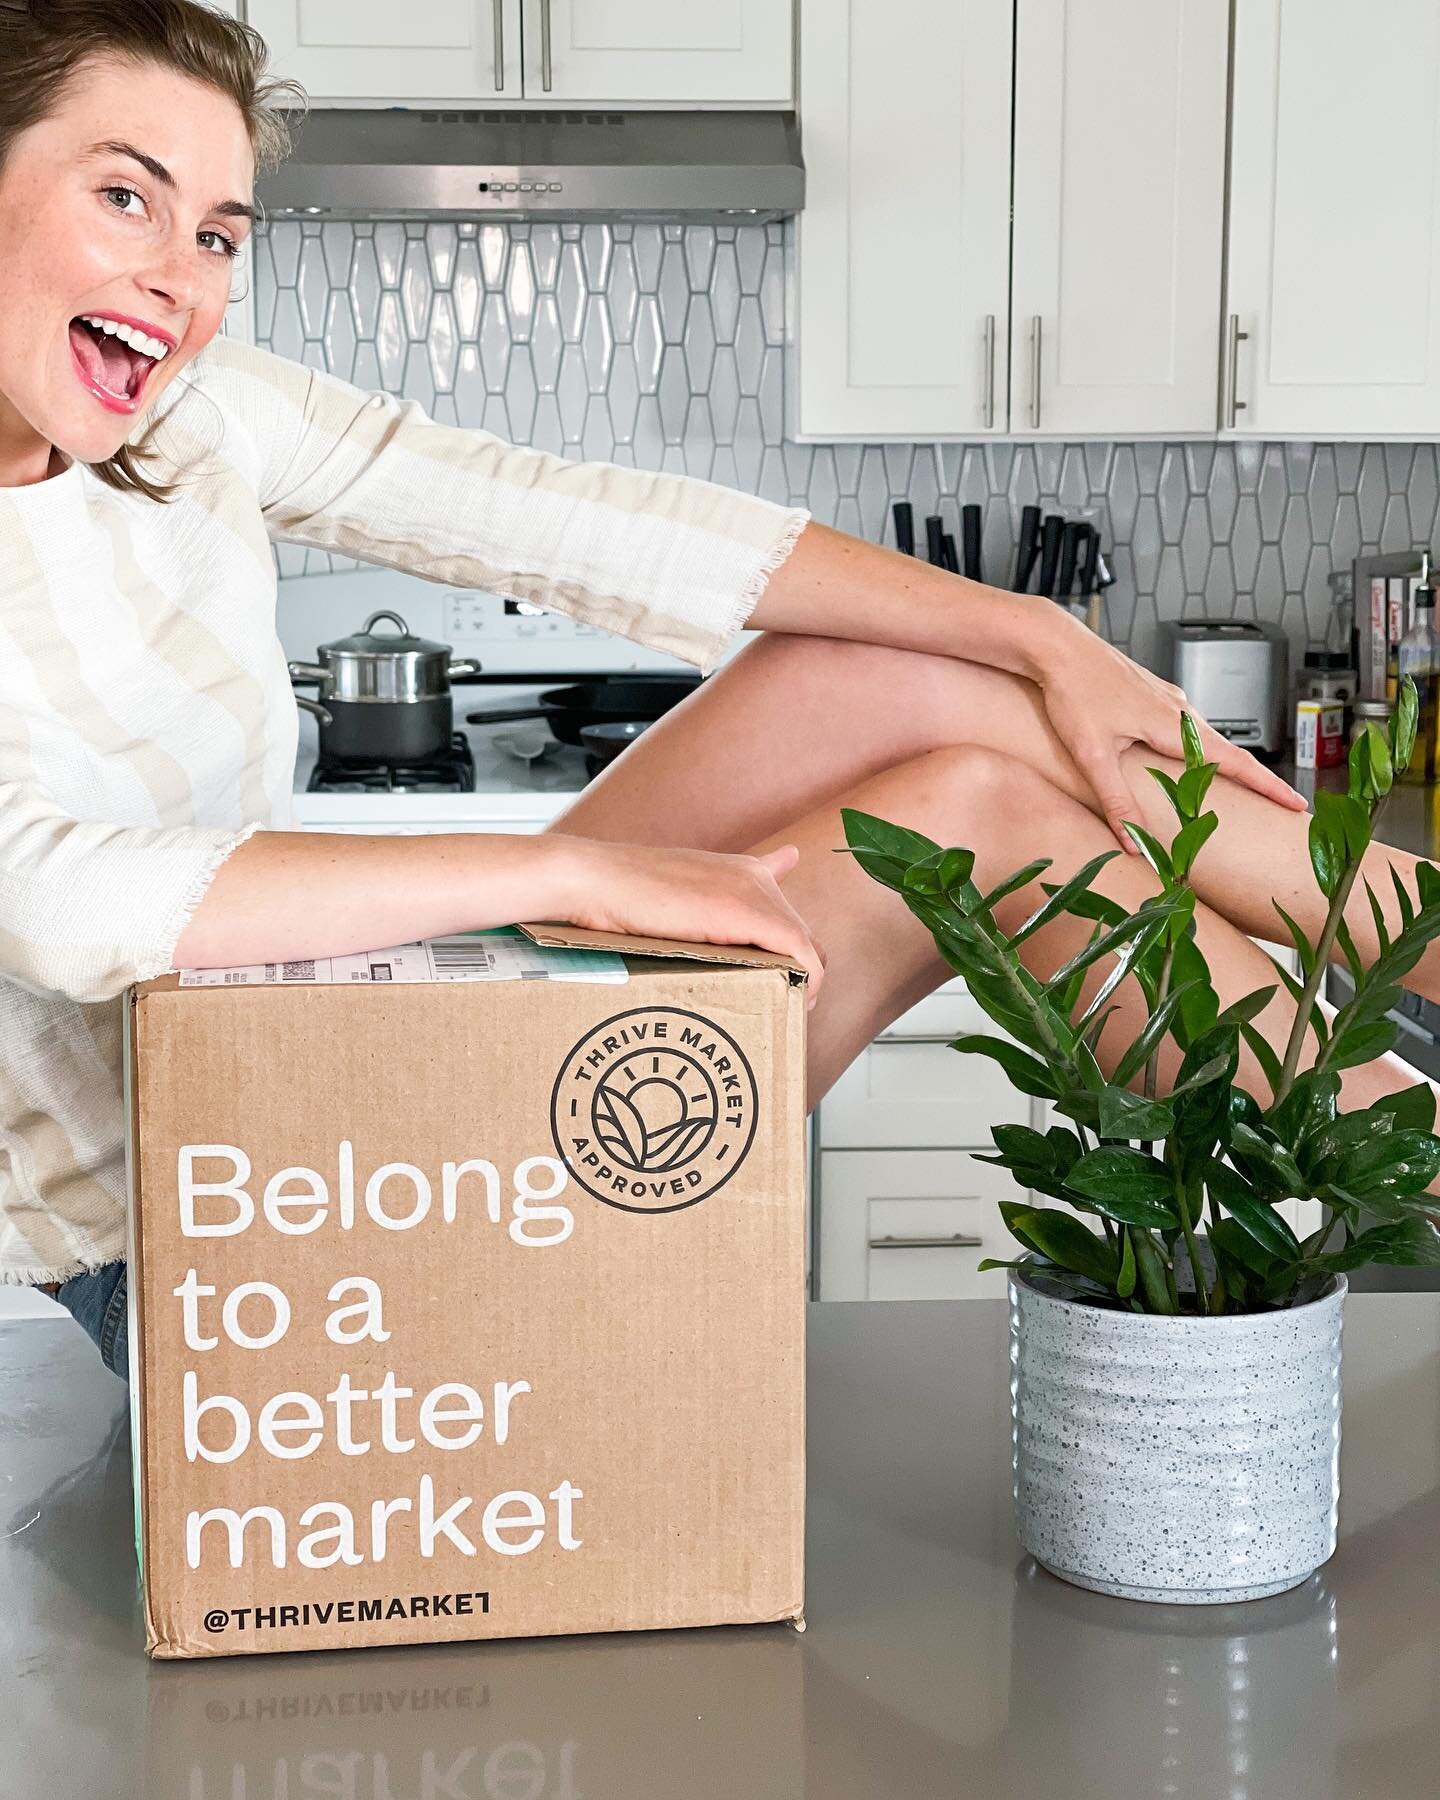 What makes @thrivemarket a #doitbetterbrand ?
✅For every membership they give one away to a family in need.
✅Products are 25%-50% off making healthier, cleaner living more accessible.
✅High ingredient standards by prioritizing organic when they can a